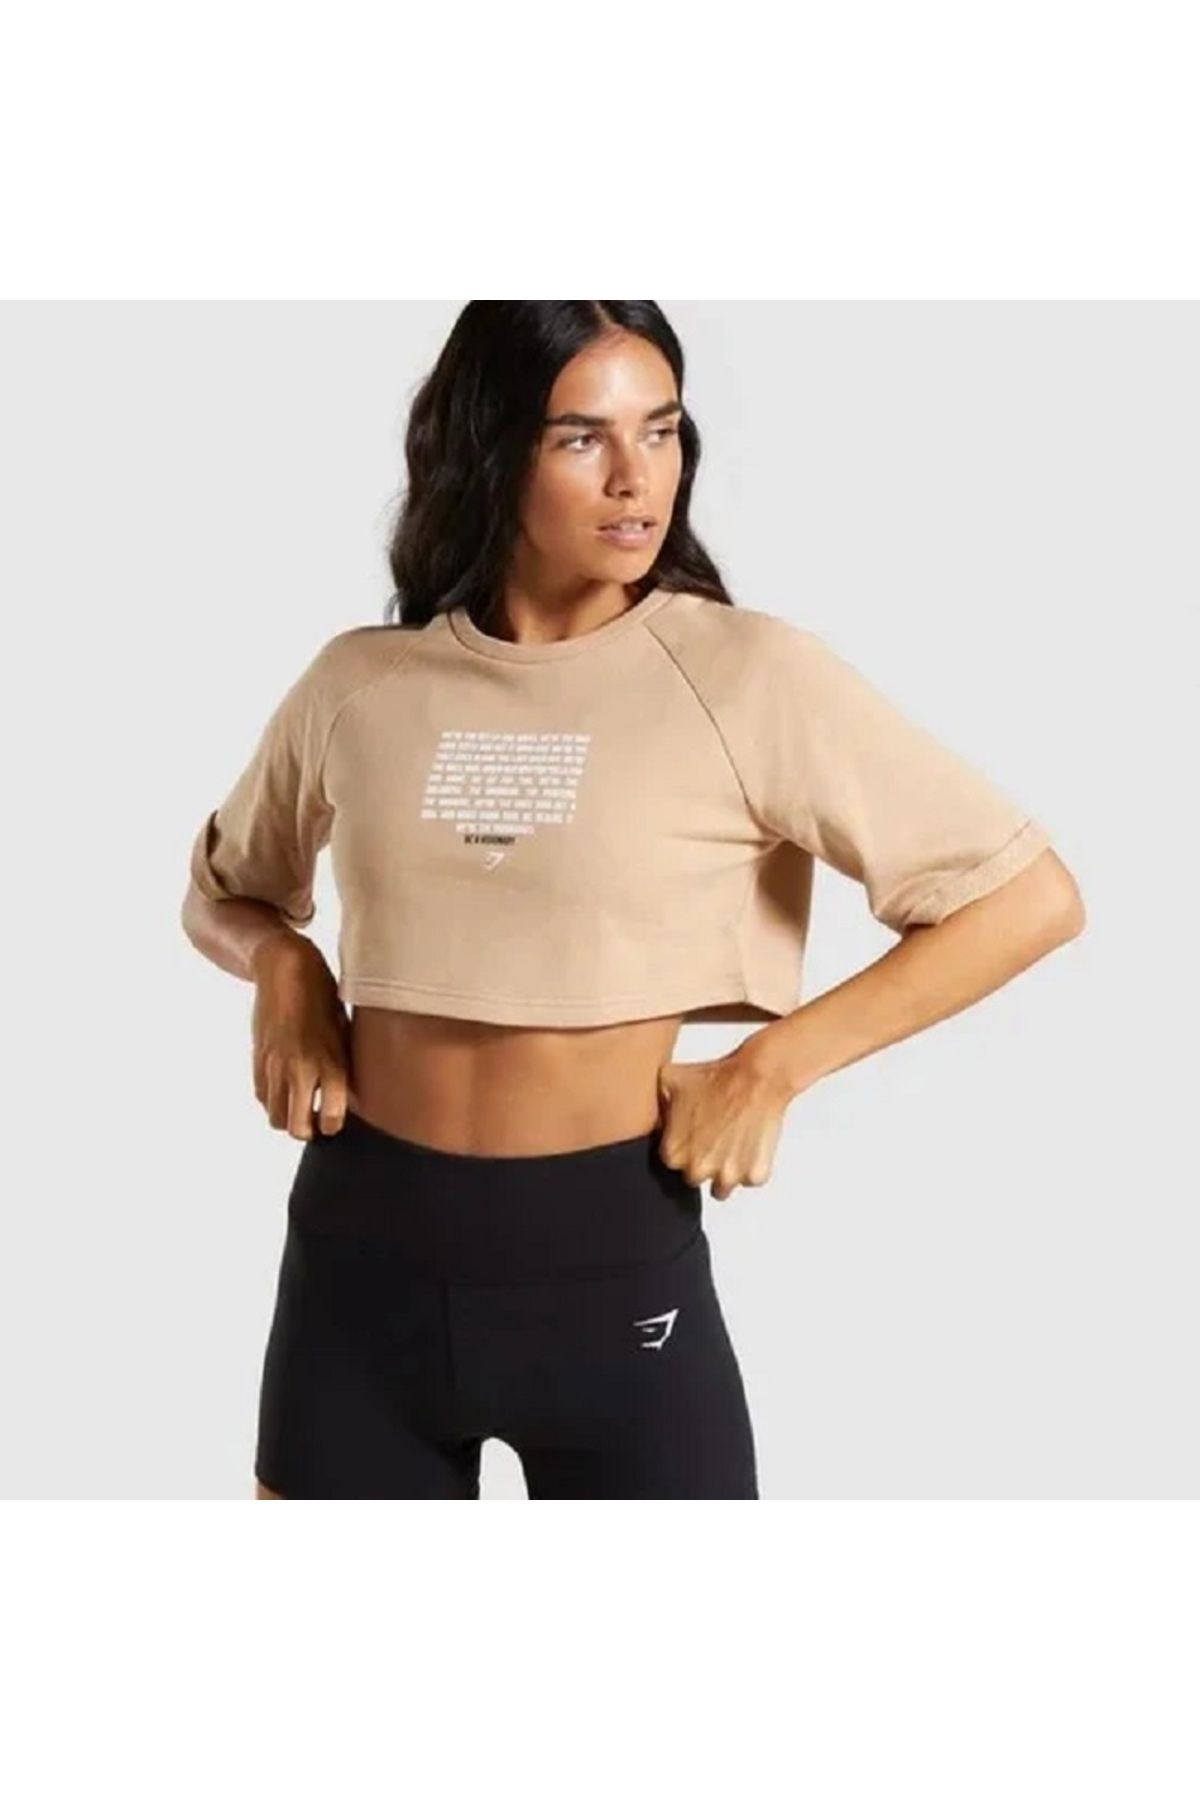 RACER Gymshark The Visionaries Boxy Cropped Sweater - Beige GLCT3788